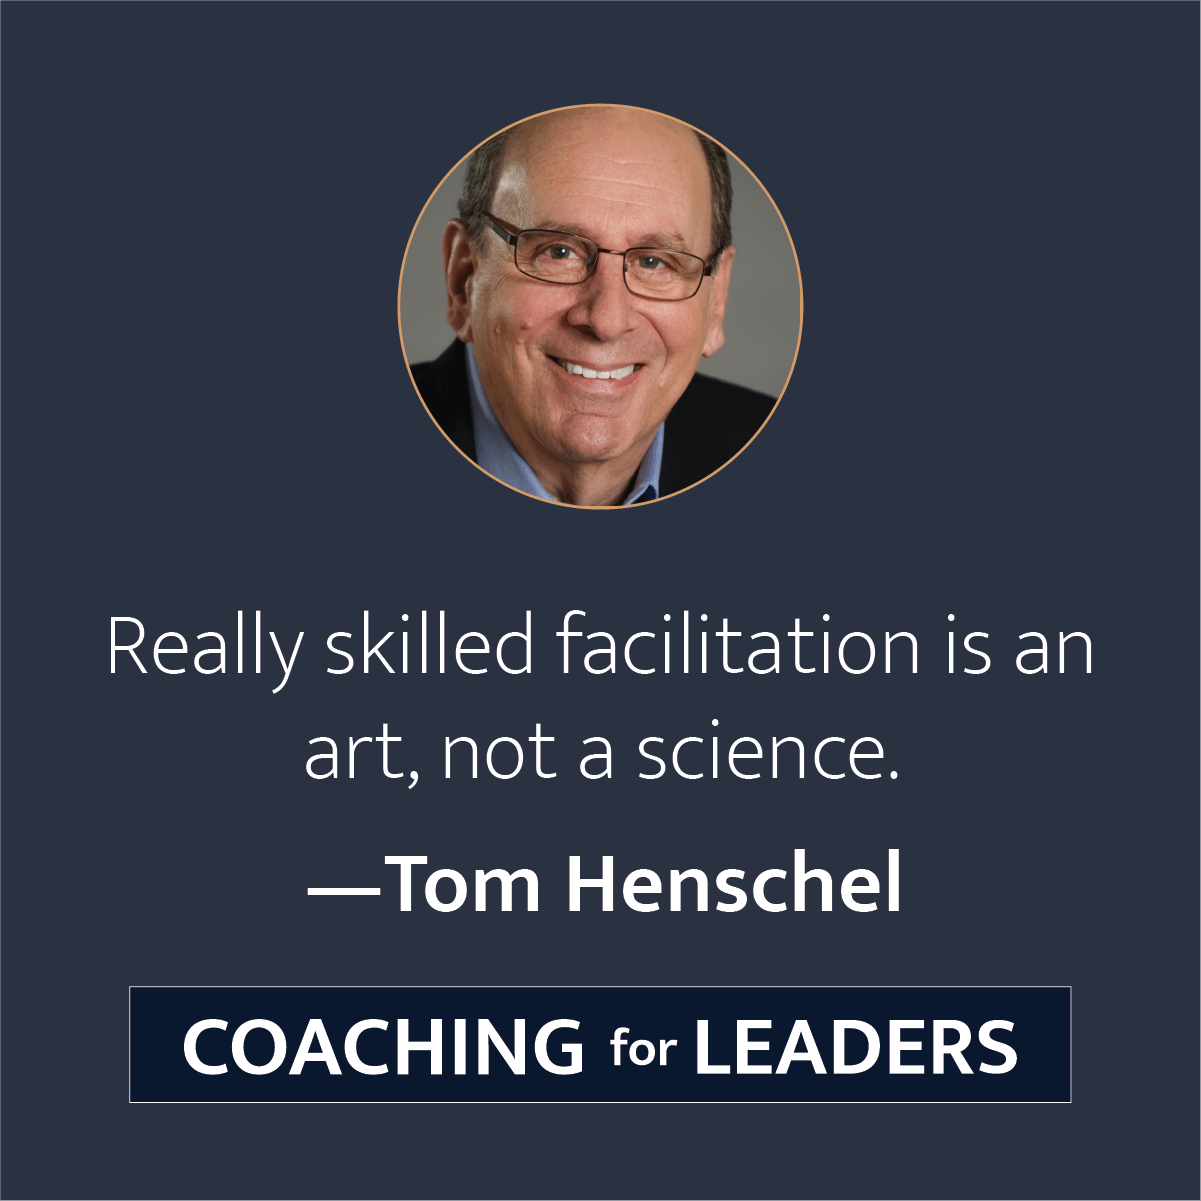 Really skilled facilitation is an art, not a science.